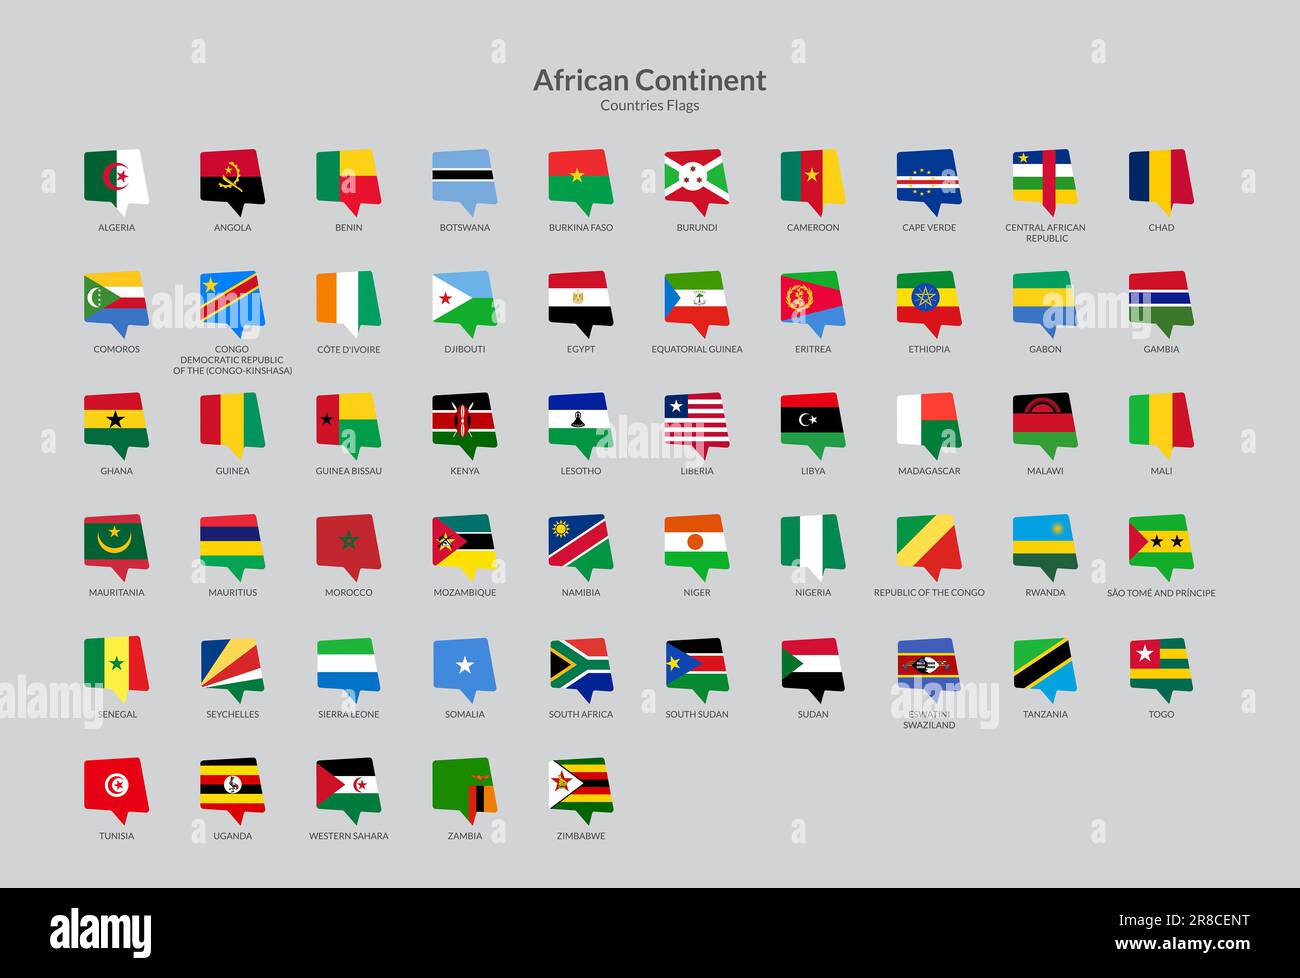 African Continent countries flag icons collection Stock Photo